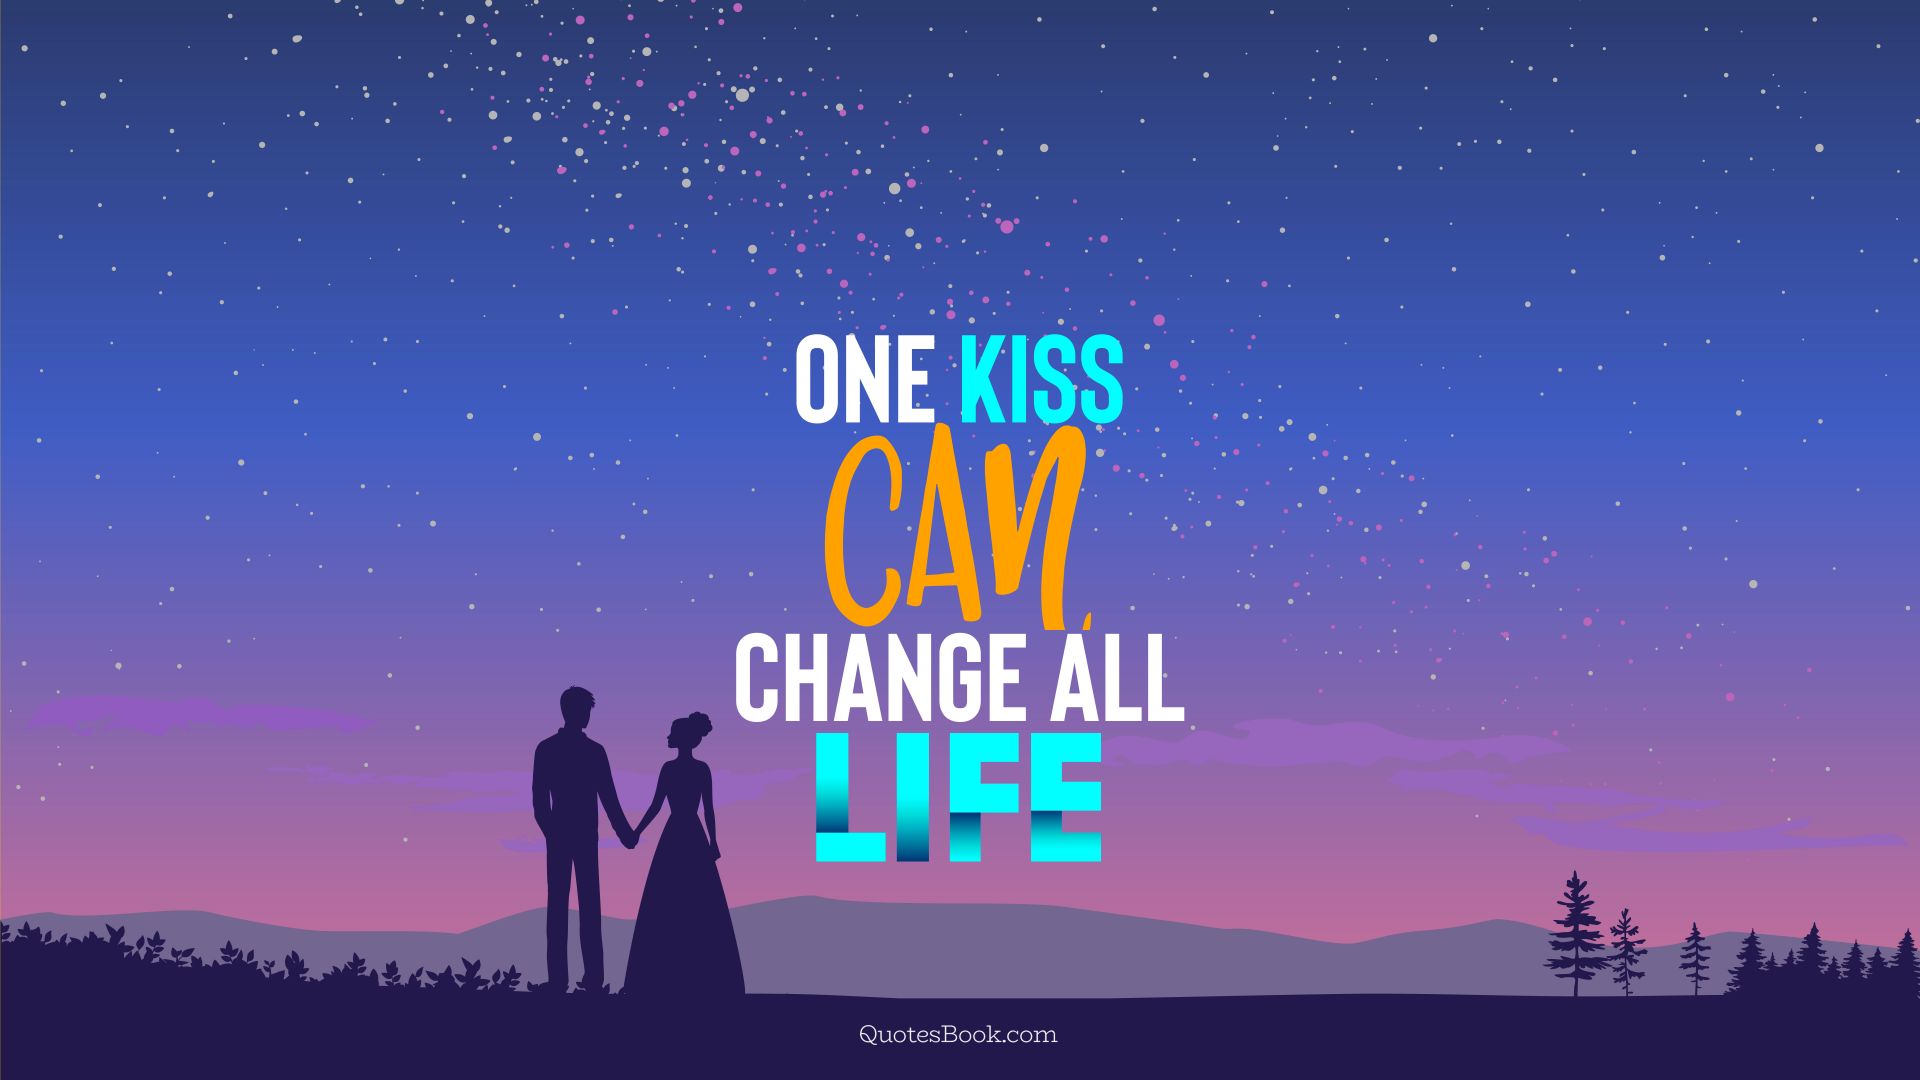 One kiss can change all life. - Quote by QuotesBook